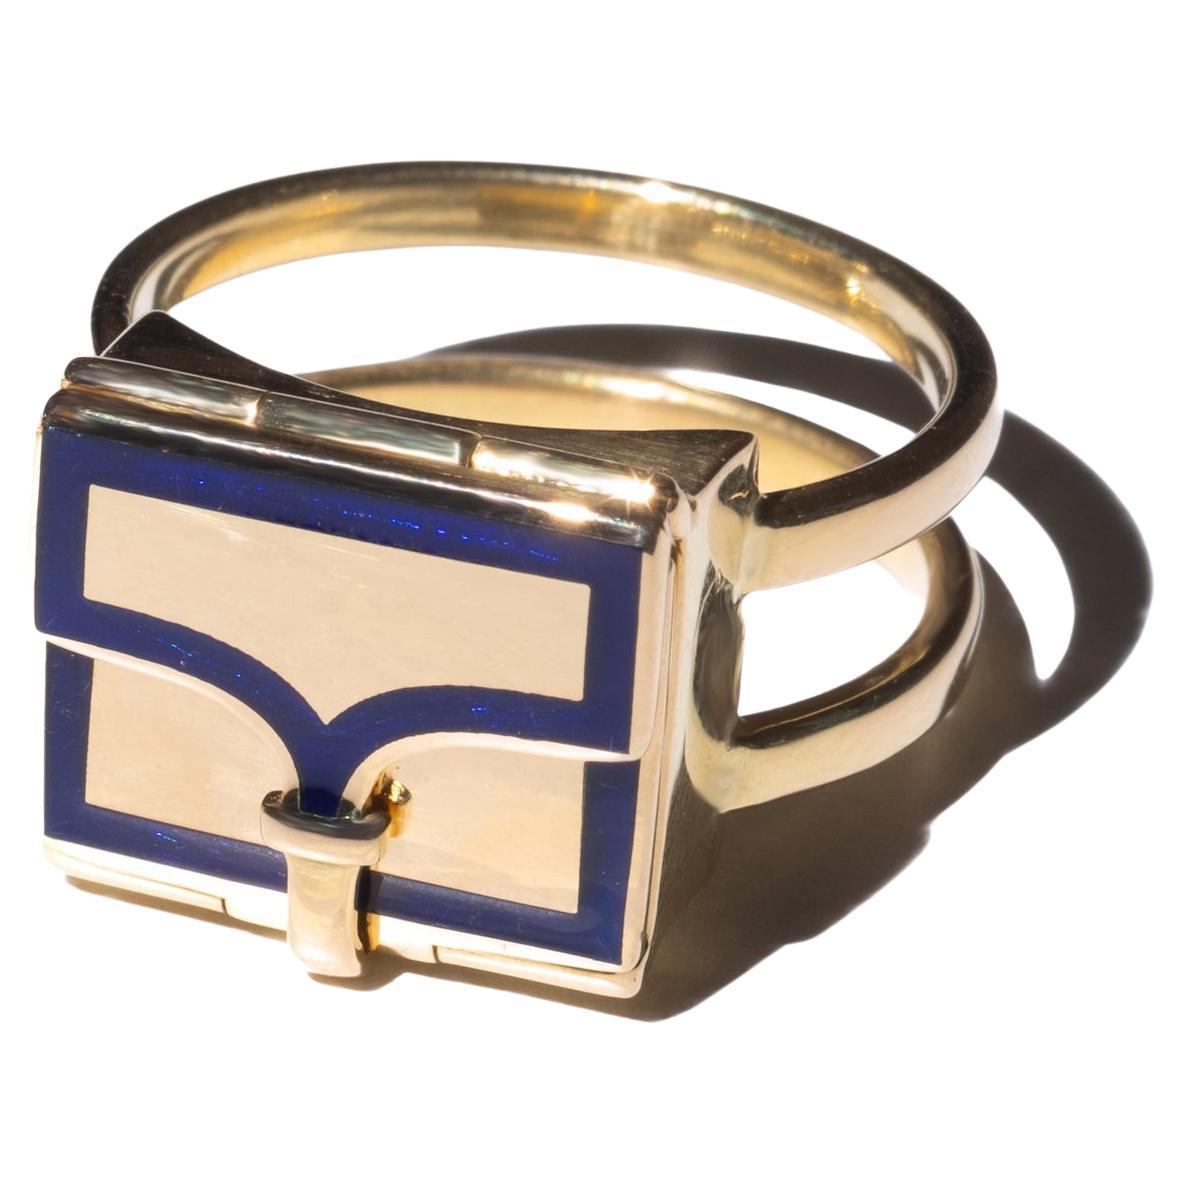 The Fleur Fairfax Book Ring in 18ct Gold and Enamel - Sapphire Blue US 5.75 For Sale